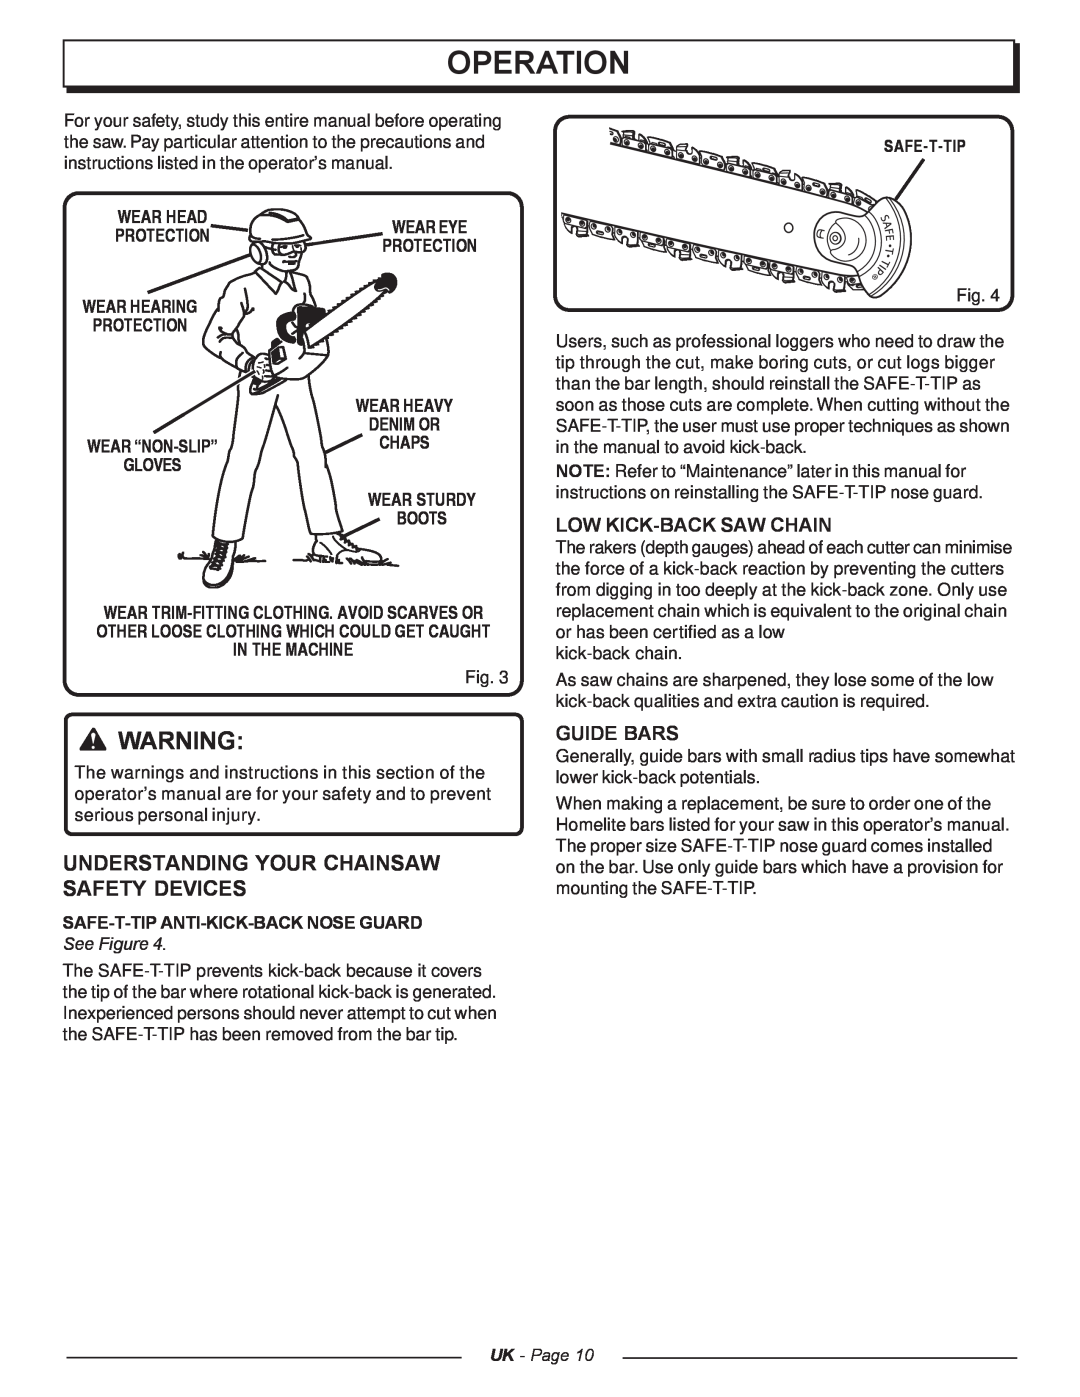 Homelite UT74121A Operation, Understanding Your Chainsaw Safety Devices, Low Kick-Back Saw Chain, Guide Bars, Wear Head 